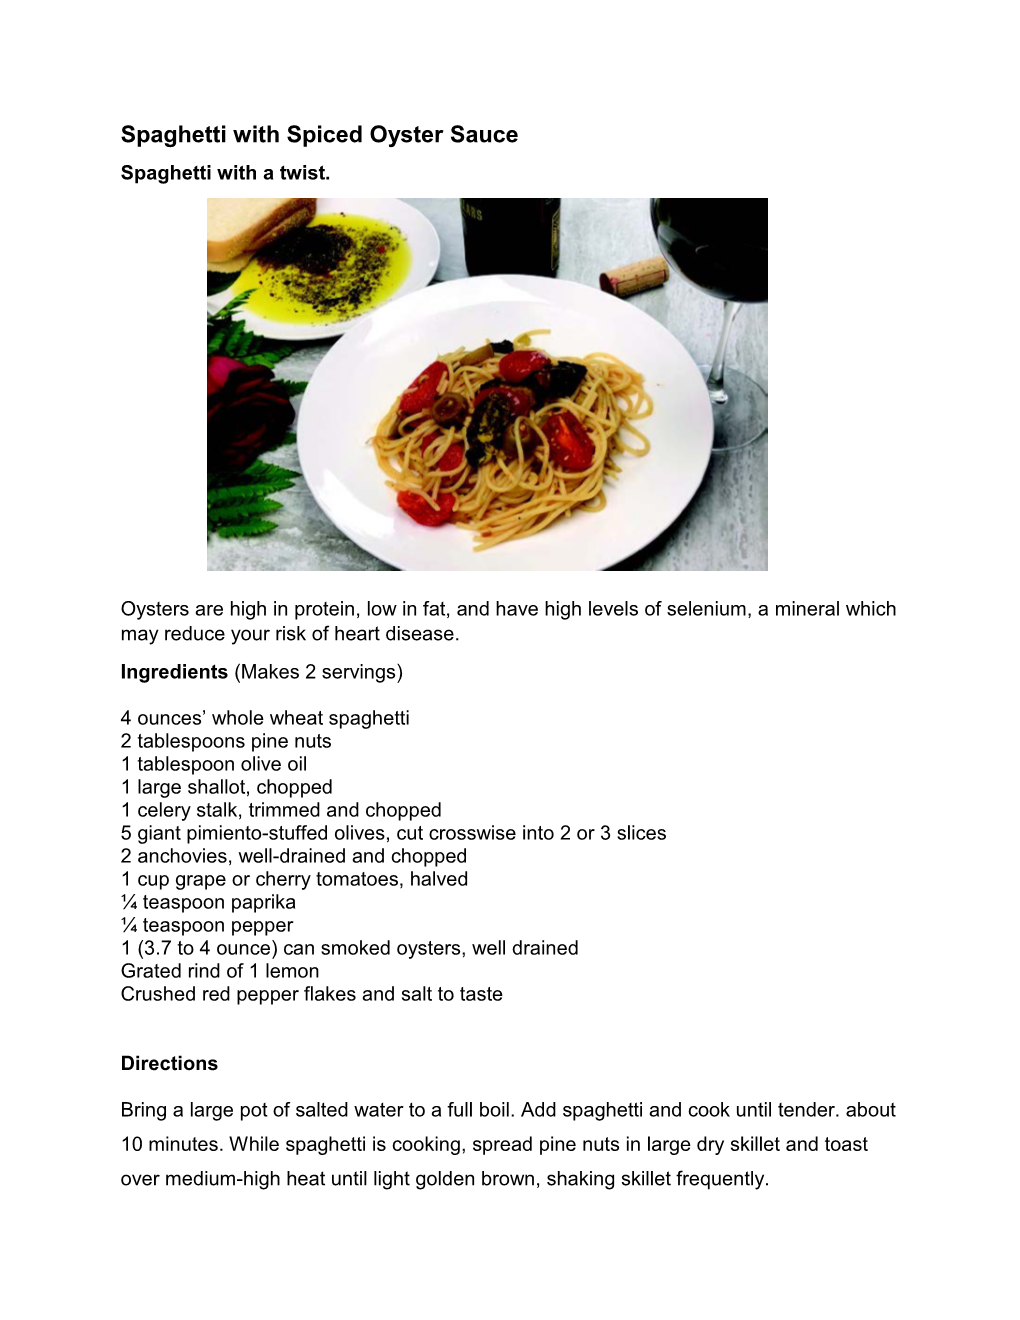 Download the Spaghetti with Spiced Oyster Sauce Recipe (PDF)